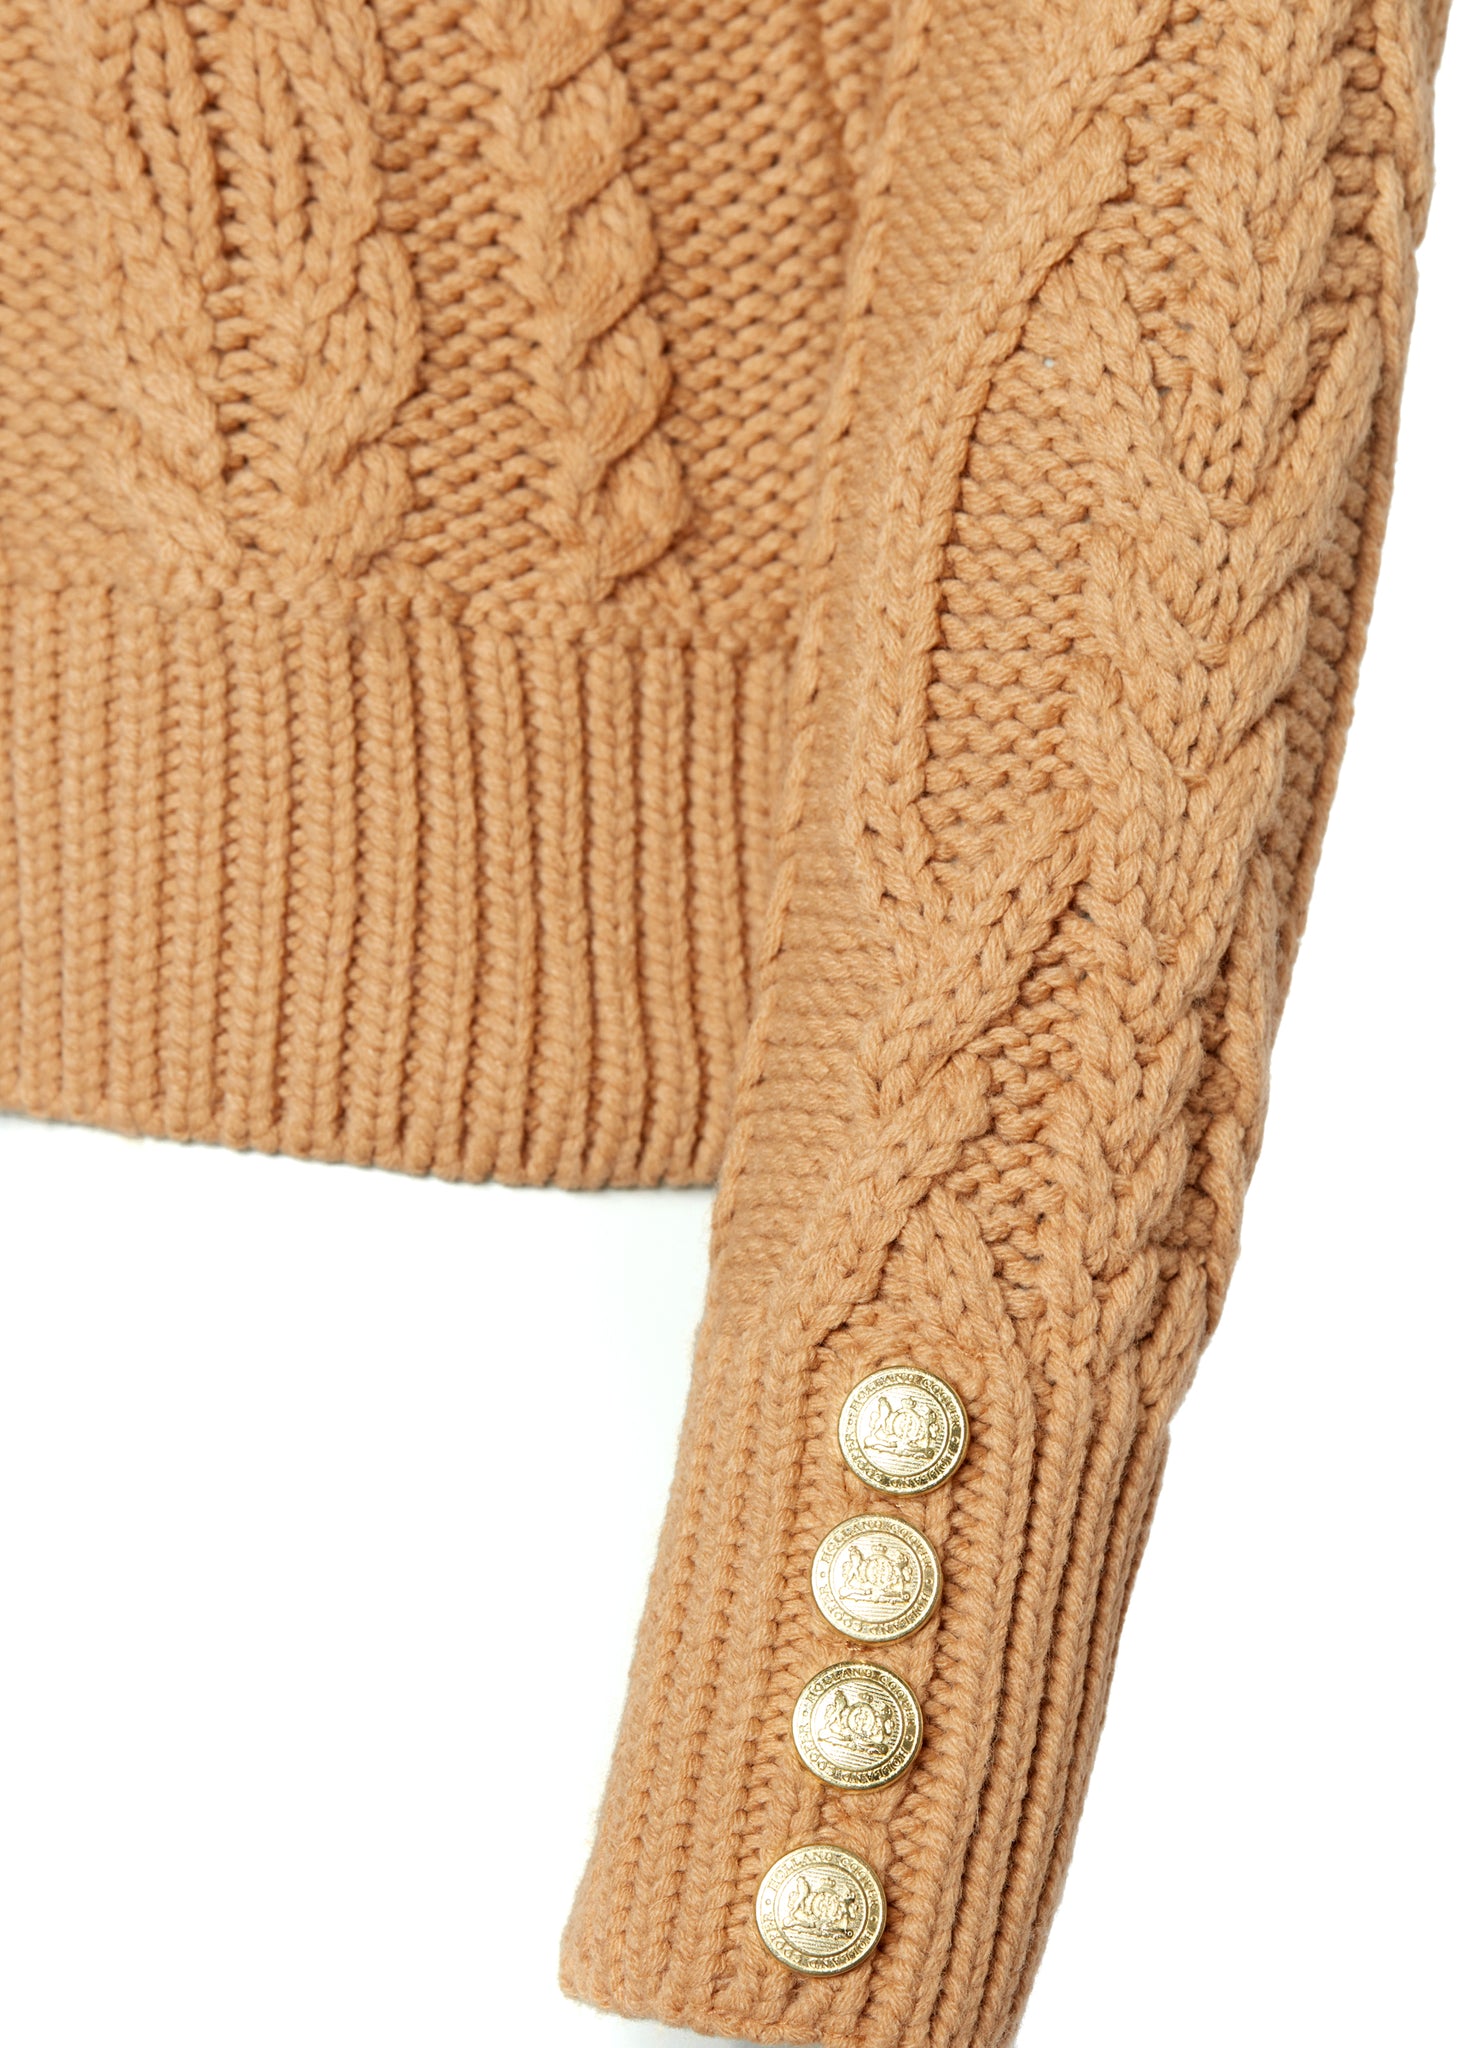 gold button detail on cuff of a chunky cable knit roll neck jumper in camel with dropped shoulders and thick ribbed cable trims and gold buttons on cuffs and collar